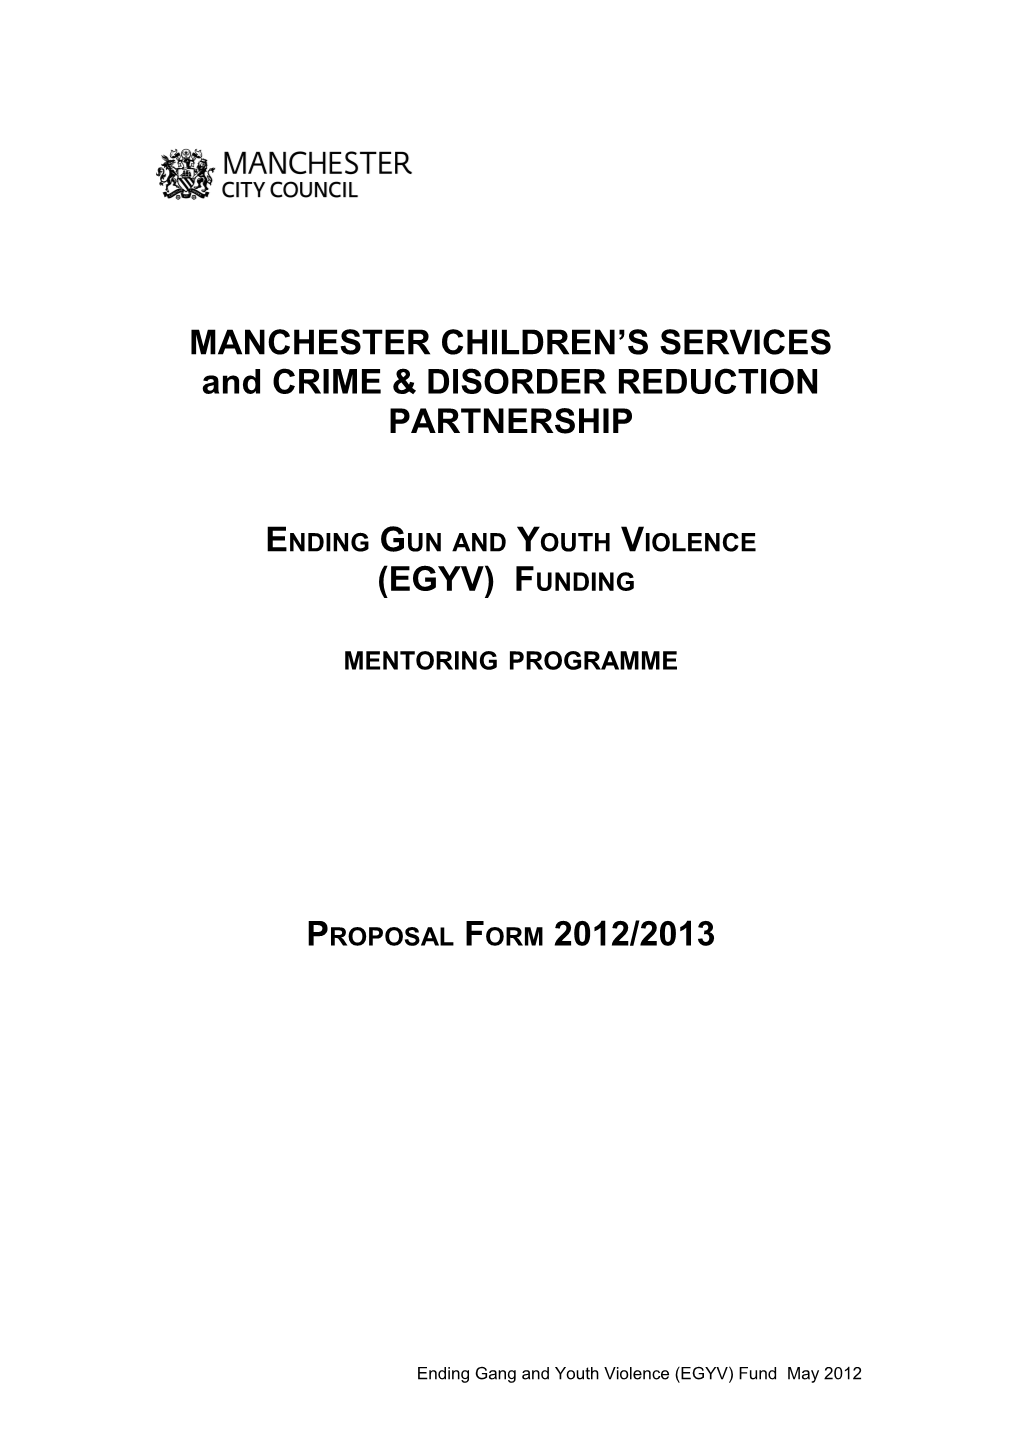 MANCHESTER CHILDREN S SERVICES and CRIME & DISORDER REDUCTION PARTNERSHIP